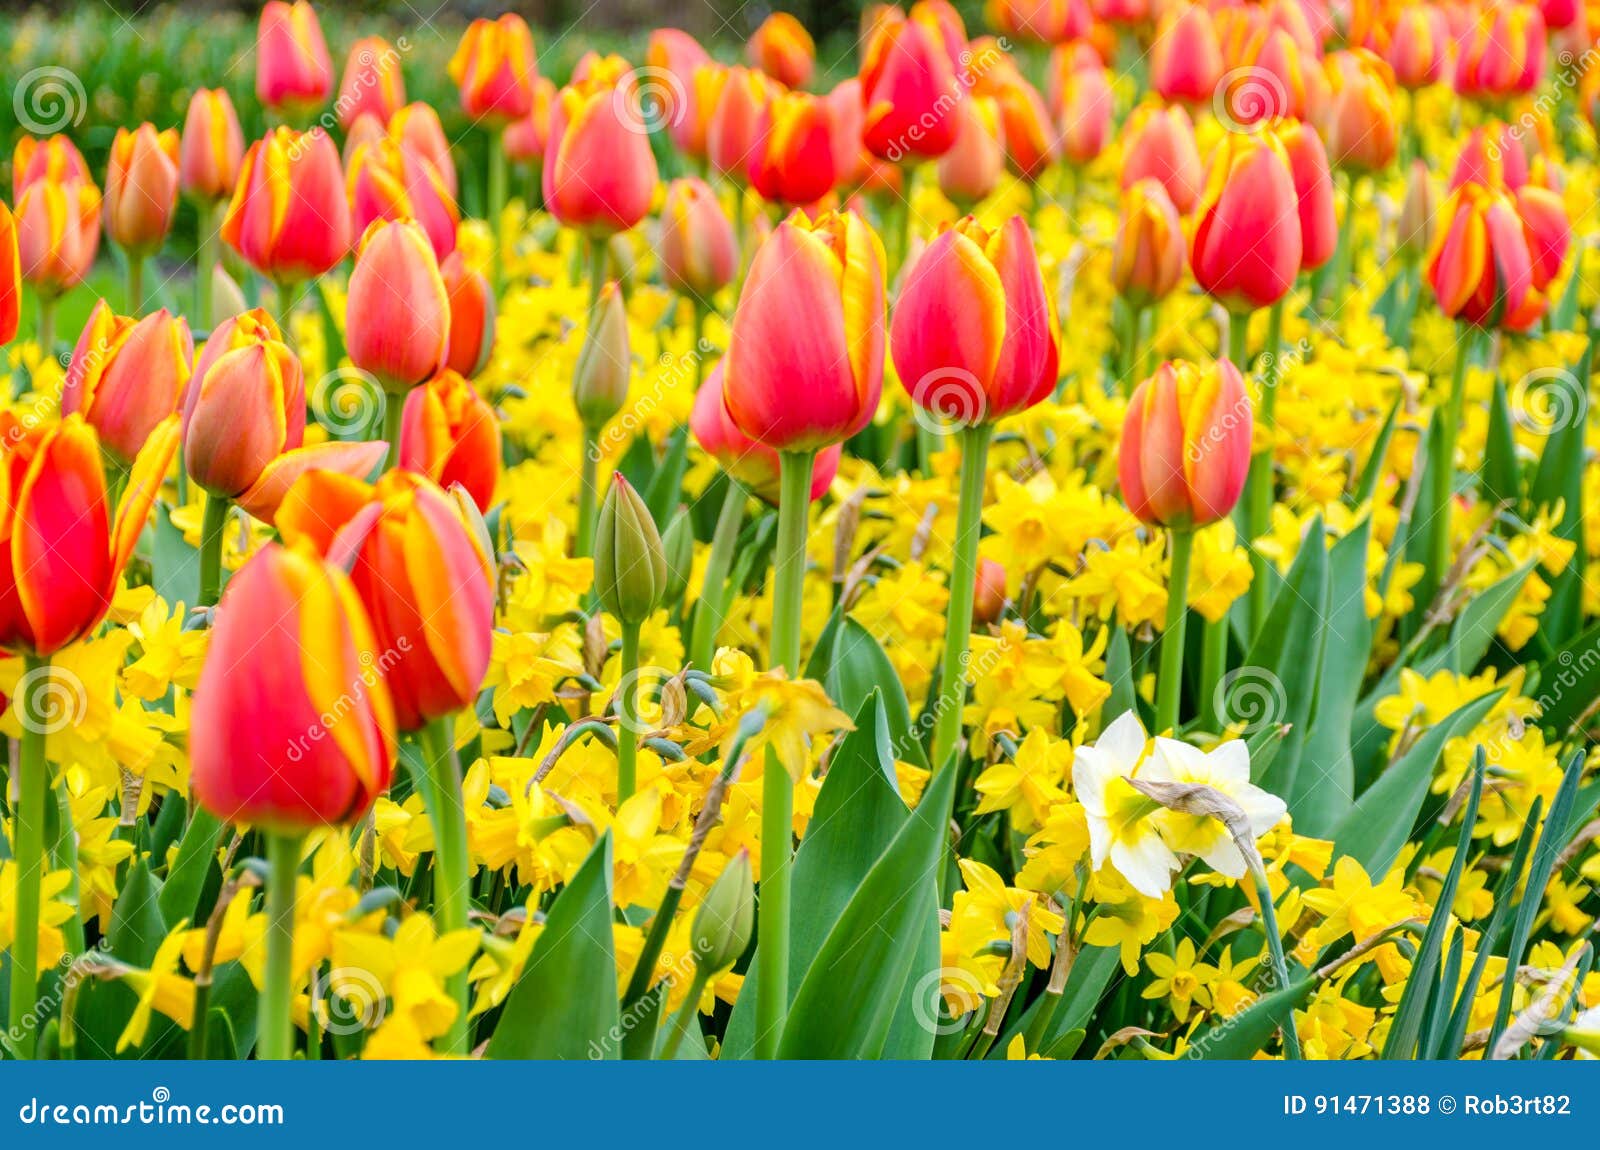 Blooming Red Tulips and Yellow Narcissus Flowers in Keukenhof Garden in ...